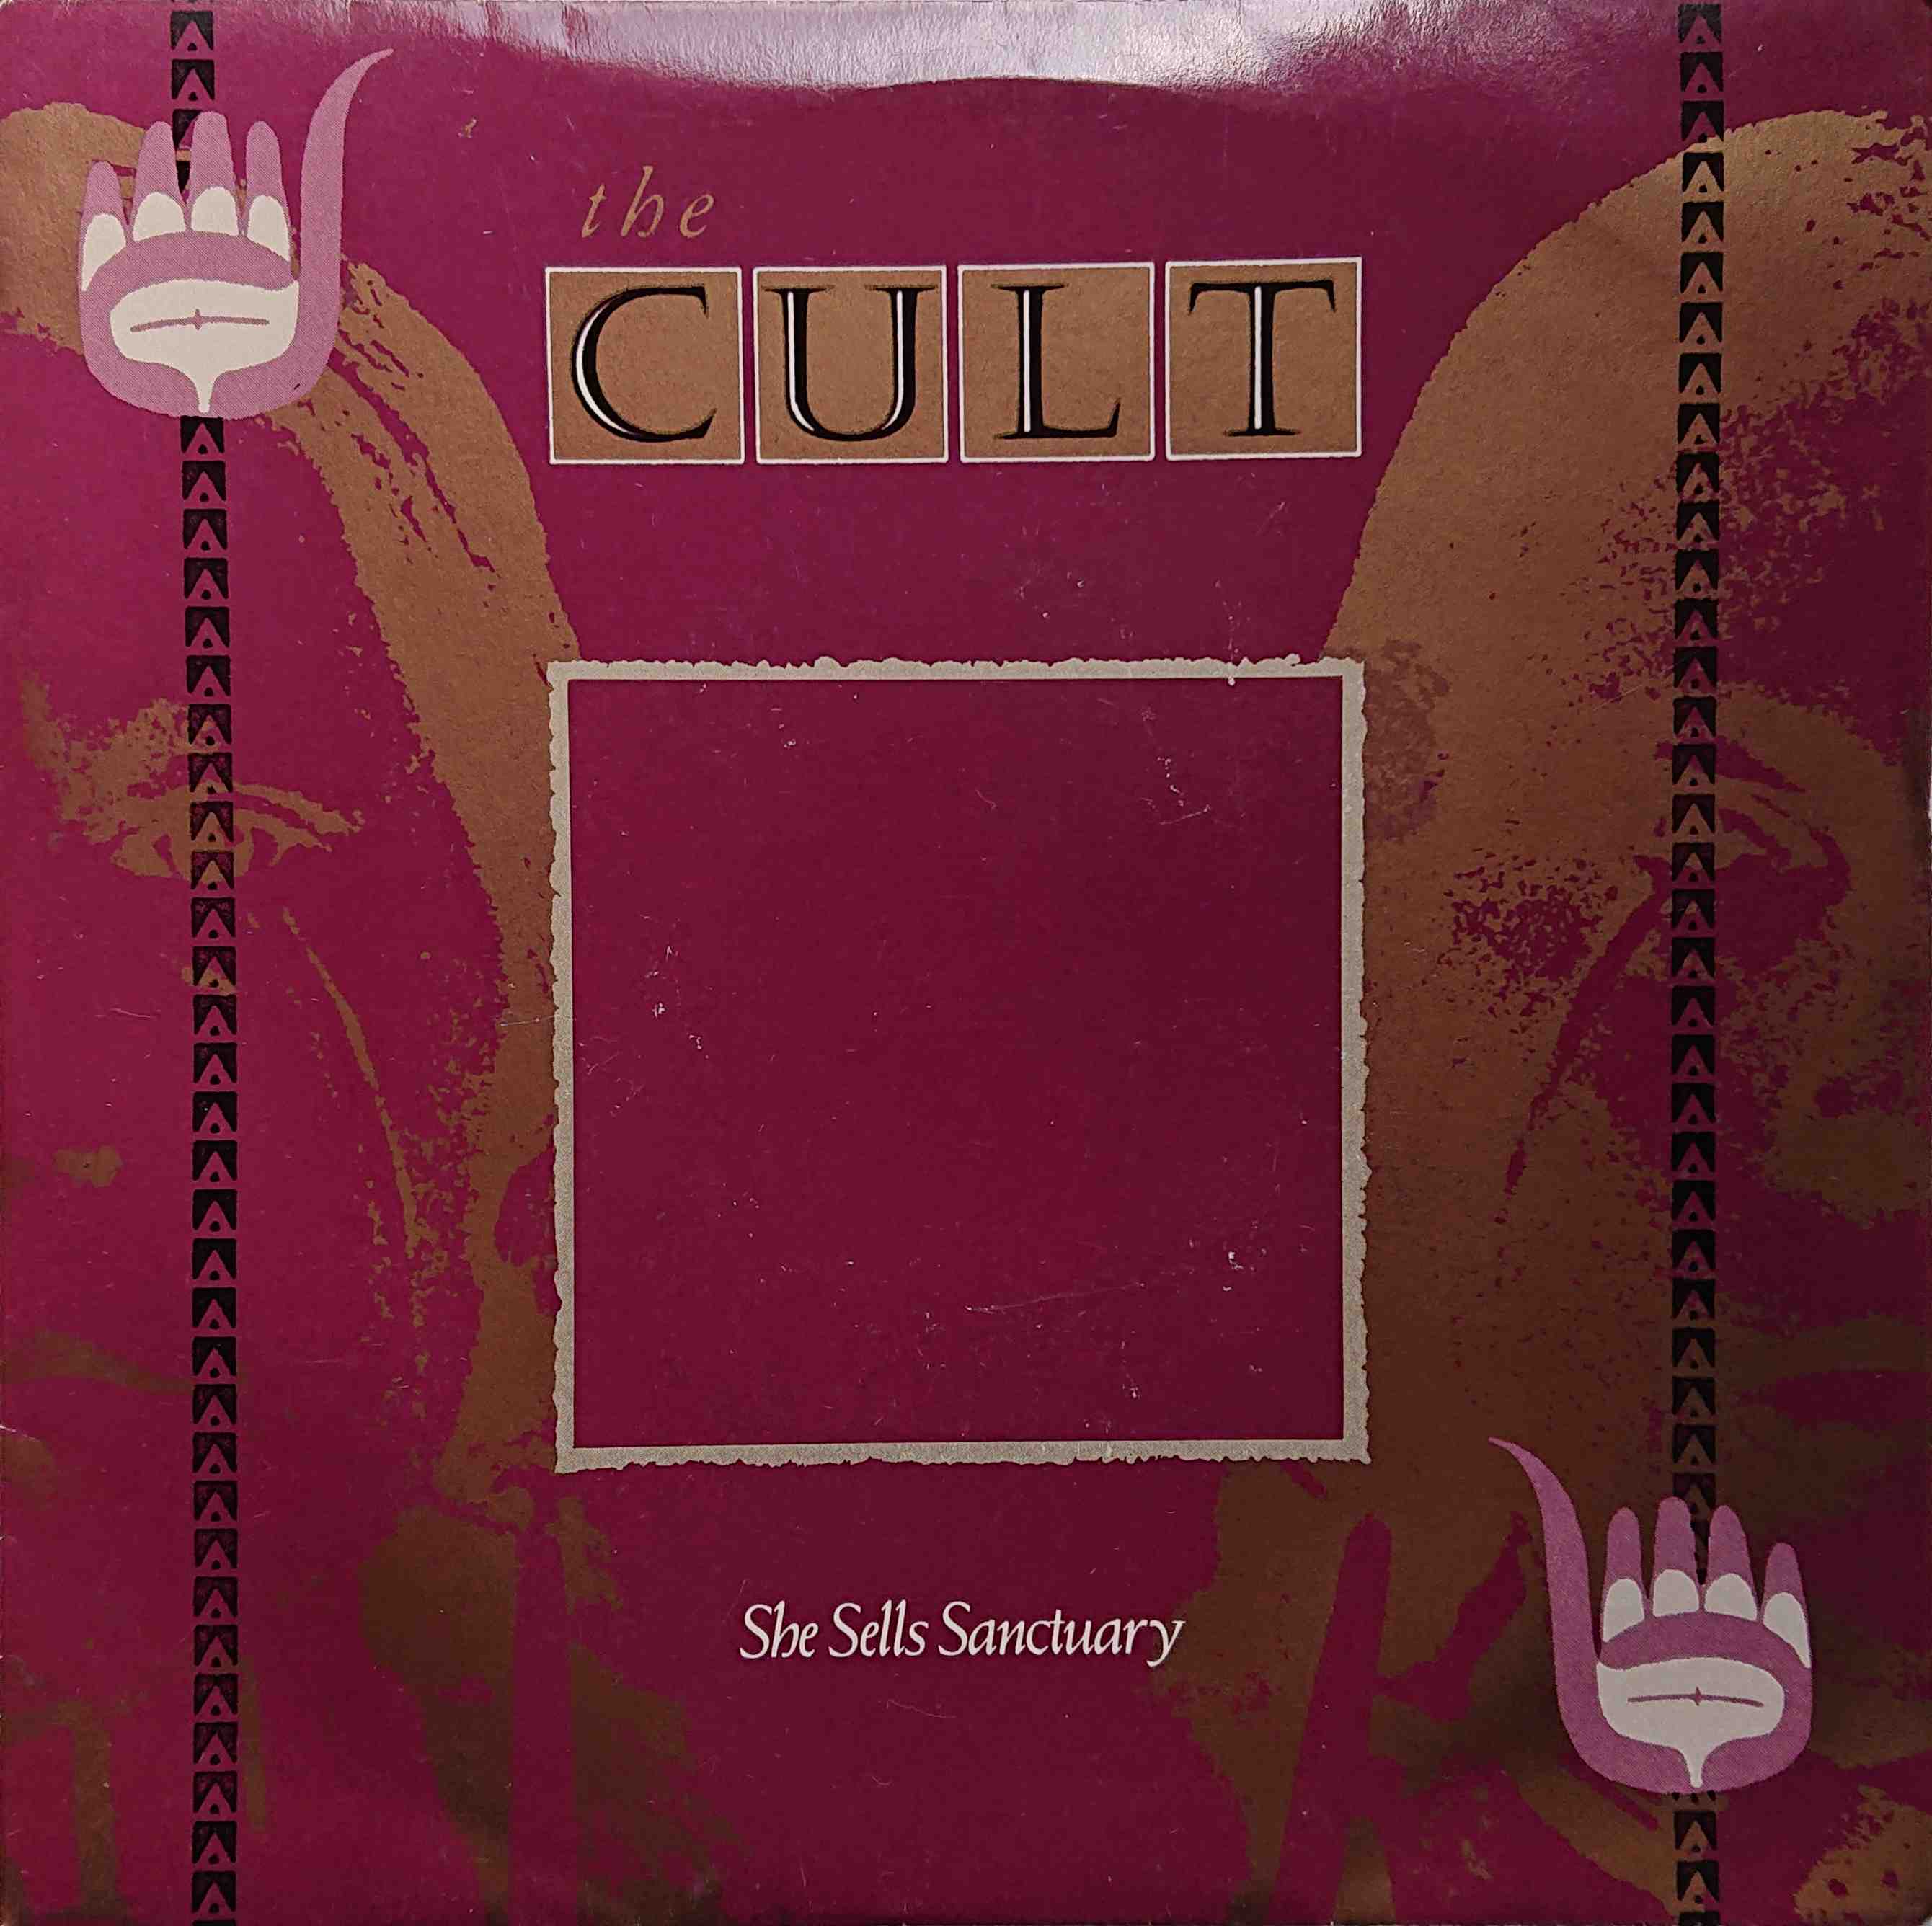 Picture of She sells sanctuary by artist The Cult 